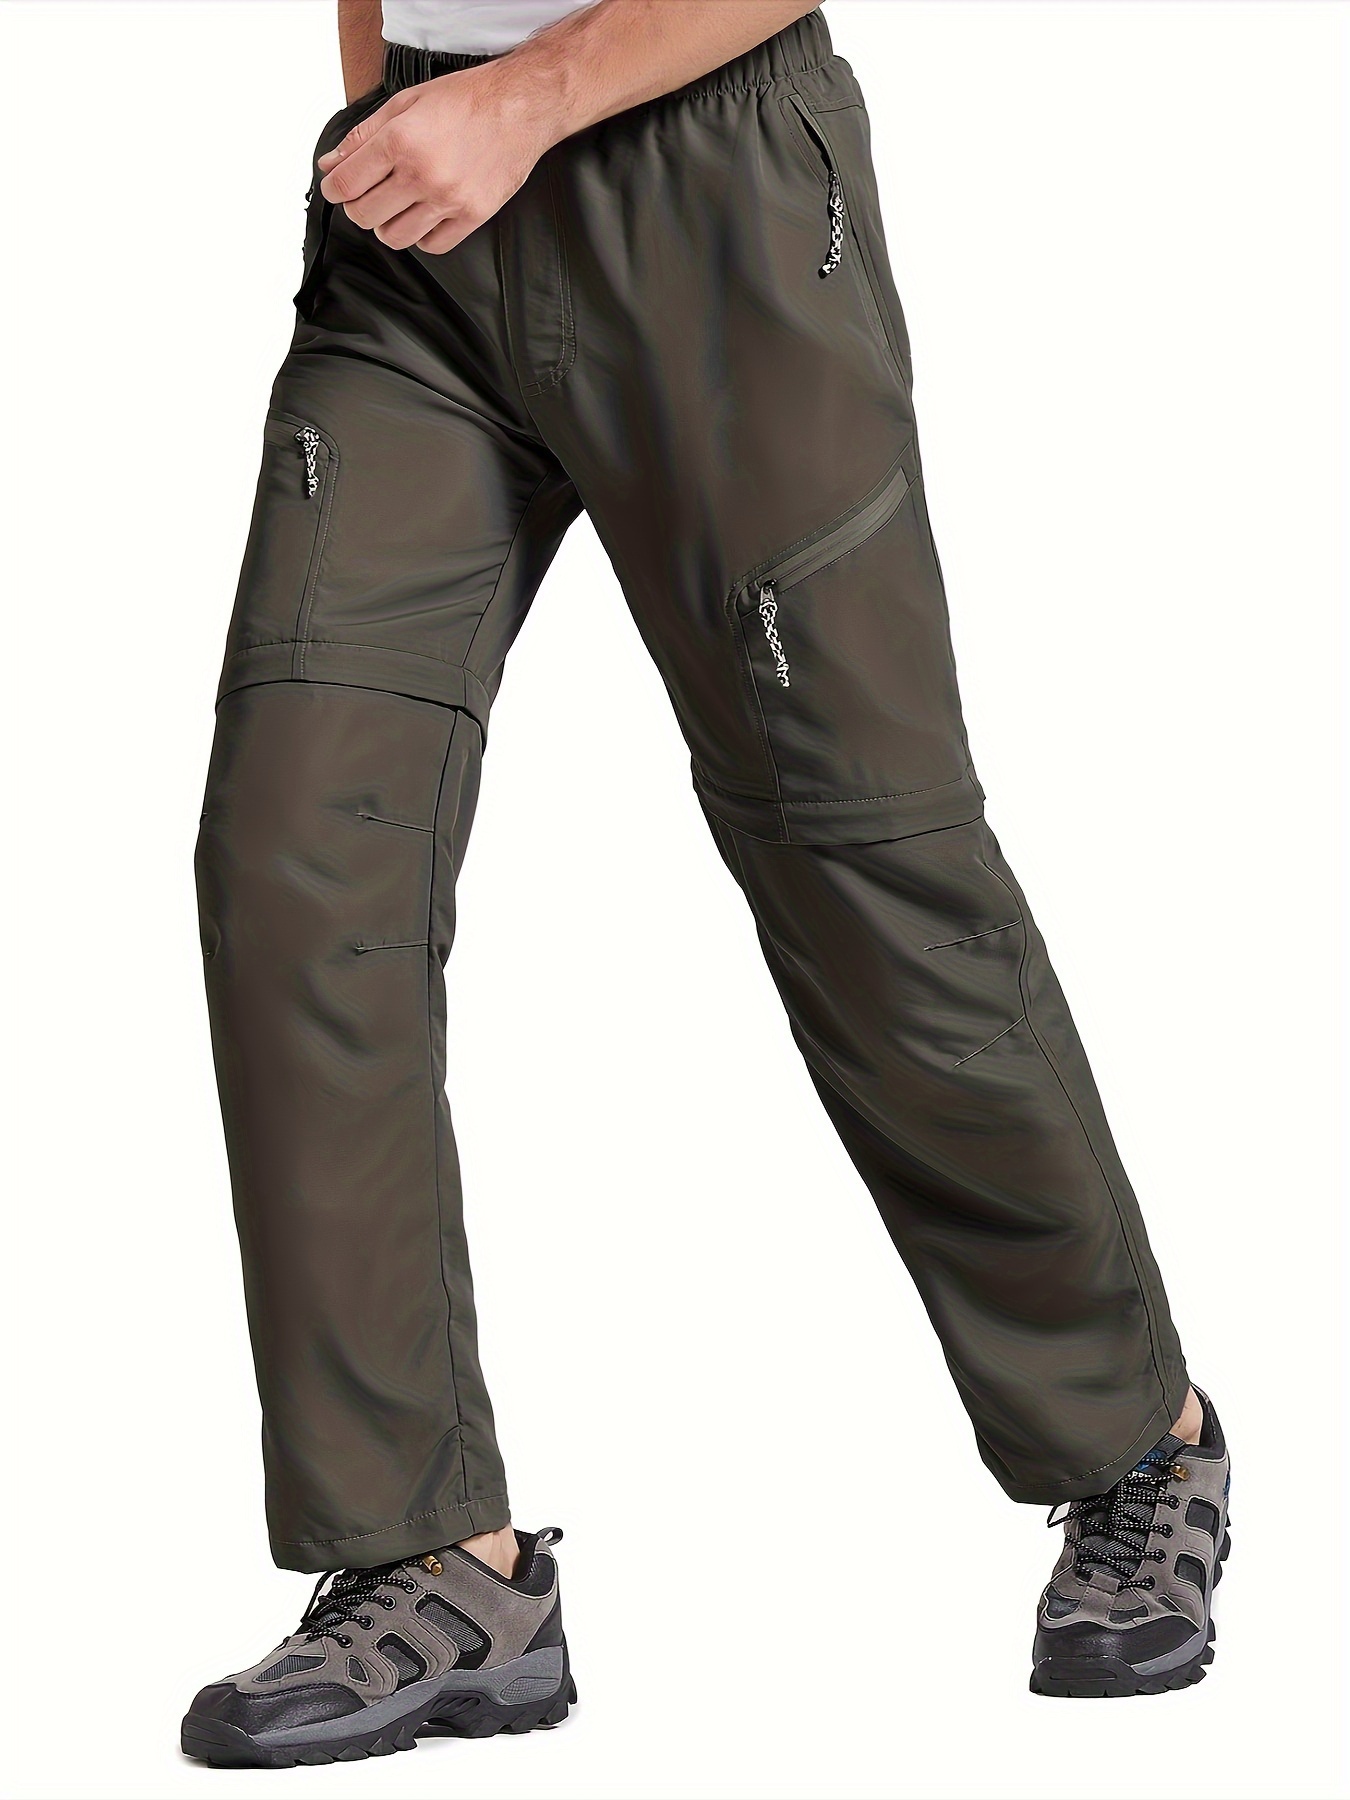  Women's Hiking Pants Lightweight Water Resistant Plus Size  Loose Fit Golf Cargo Travel Pants Outdoor Fishing Camping Pants Pockets  Dark Brown S : Clothing, Shoes & Jewelry